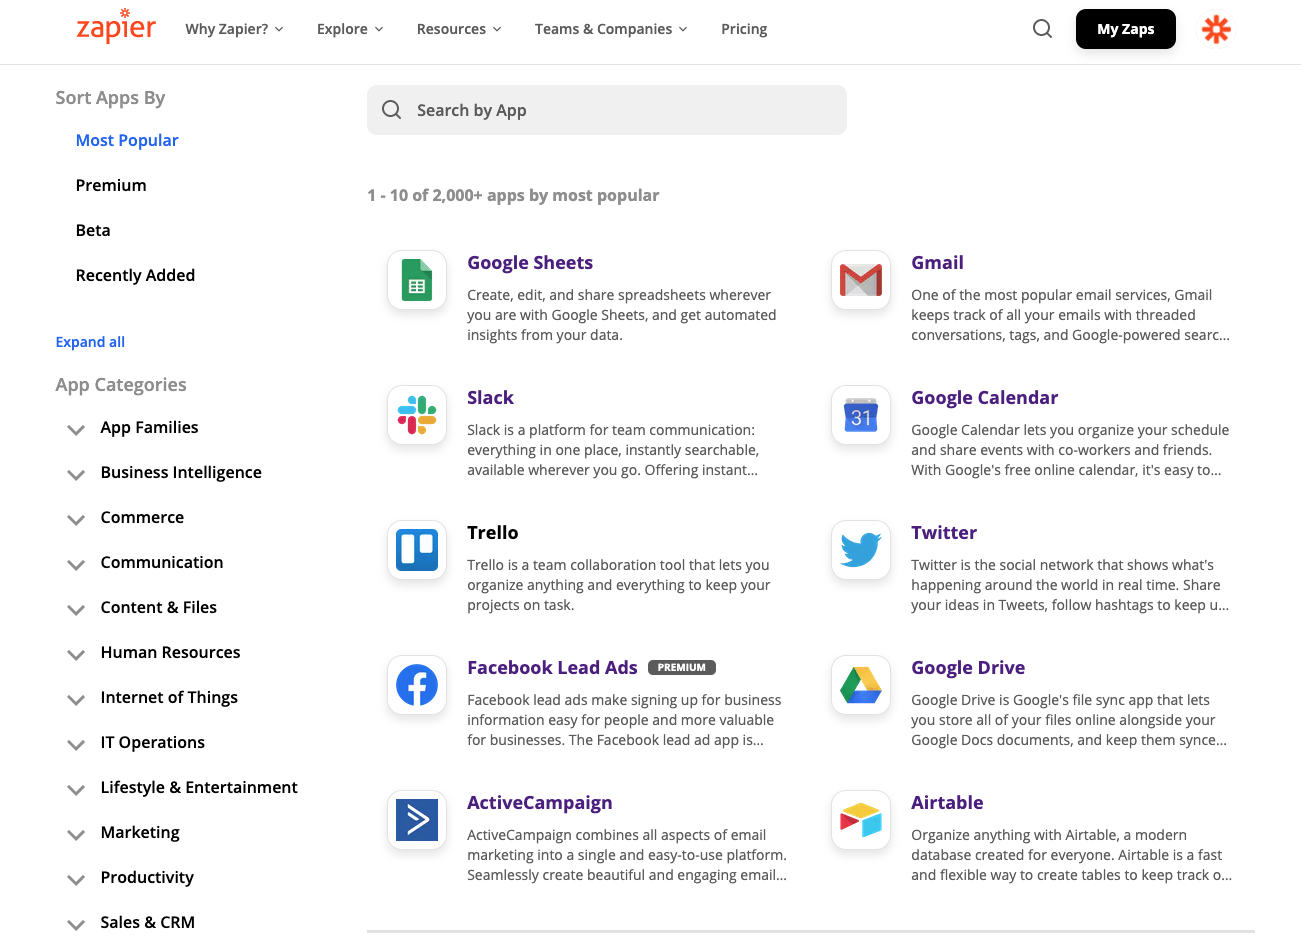 A screenshot of the Zapier app directory, showing a search bar near the top, 10 apps and app logos in the middle, and a list of app categories on the left side, like business intelligence, commerce, and communication.